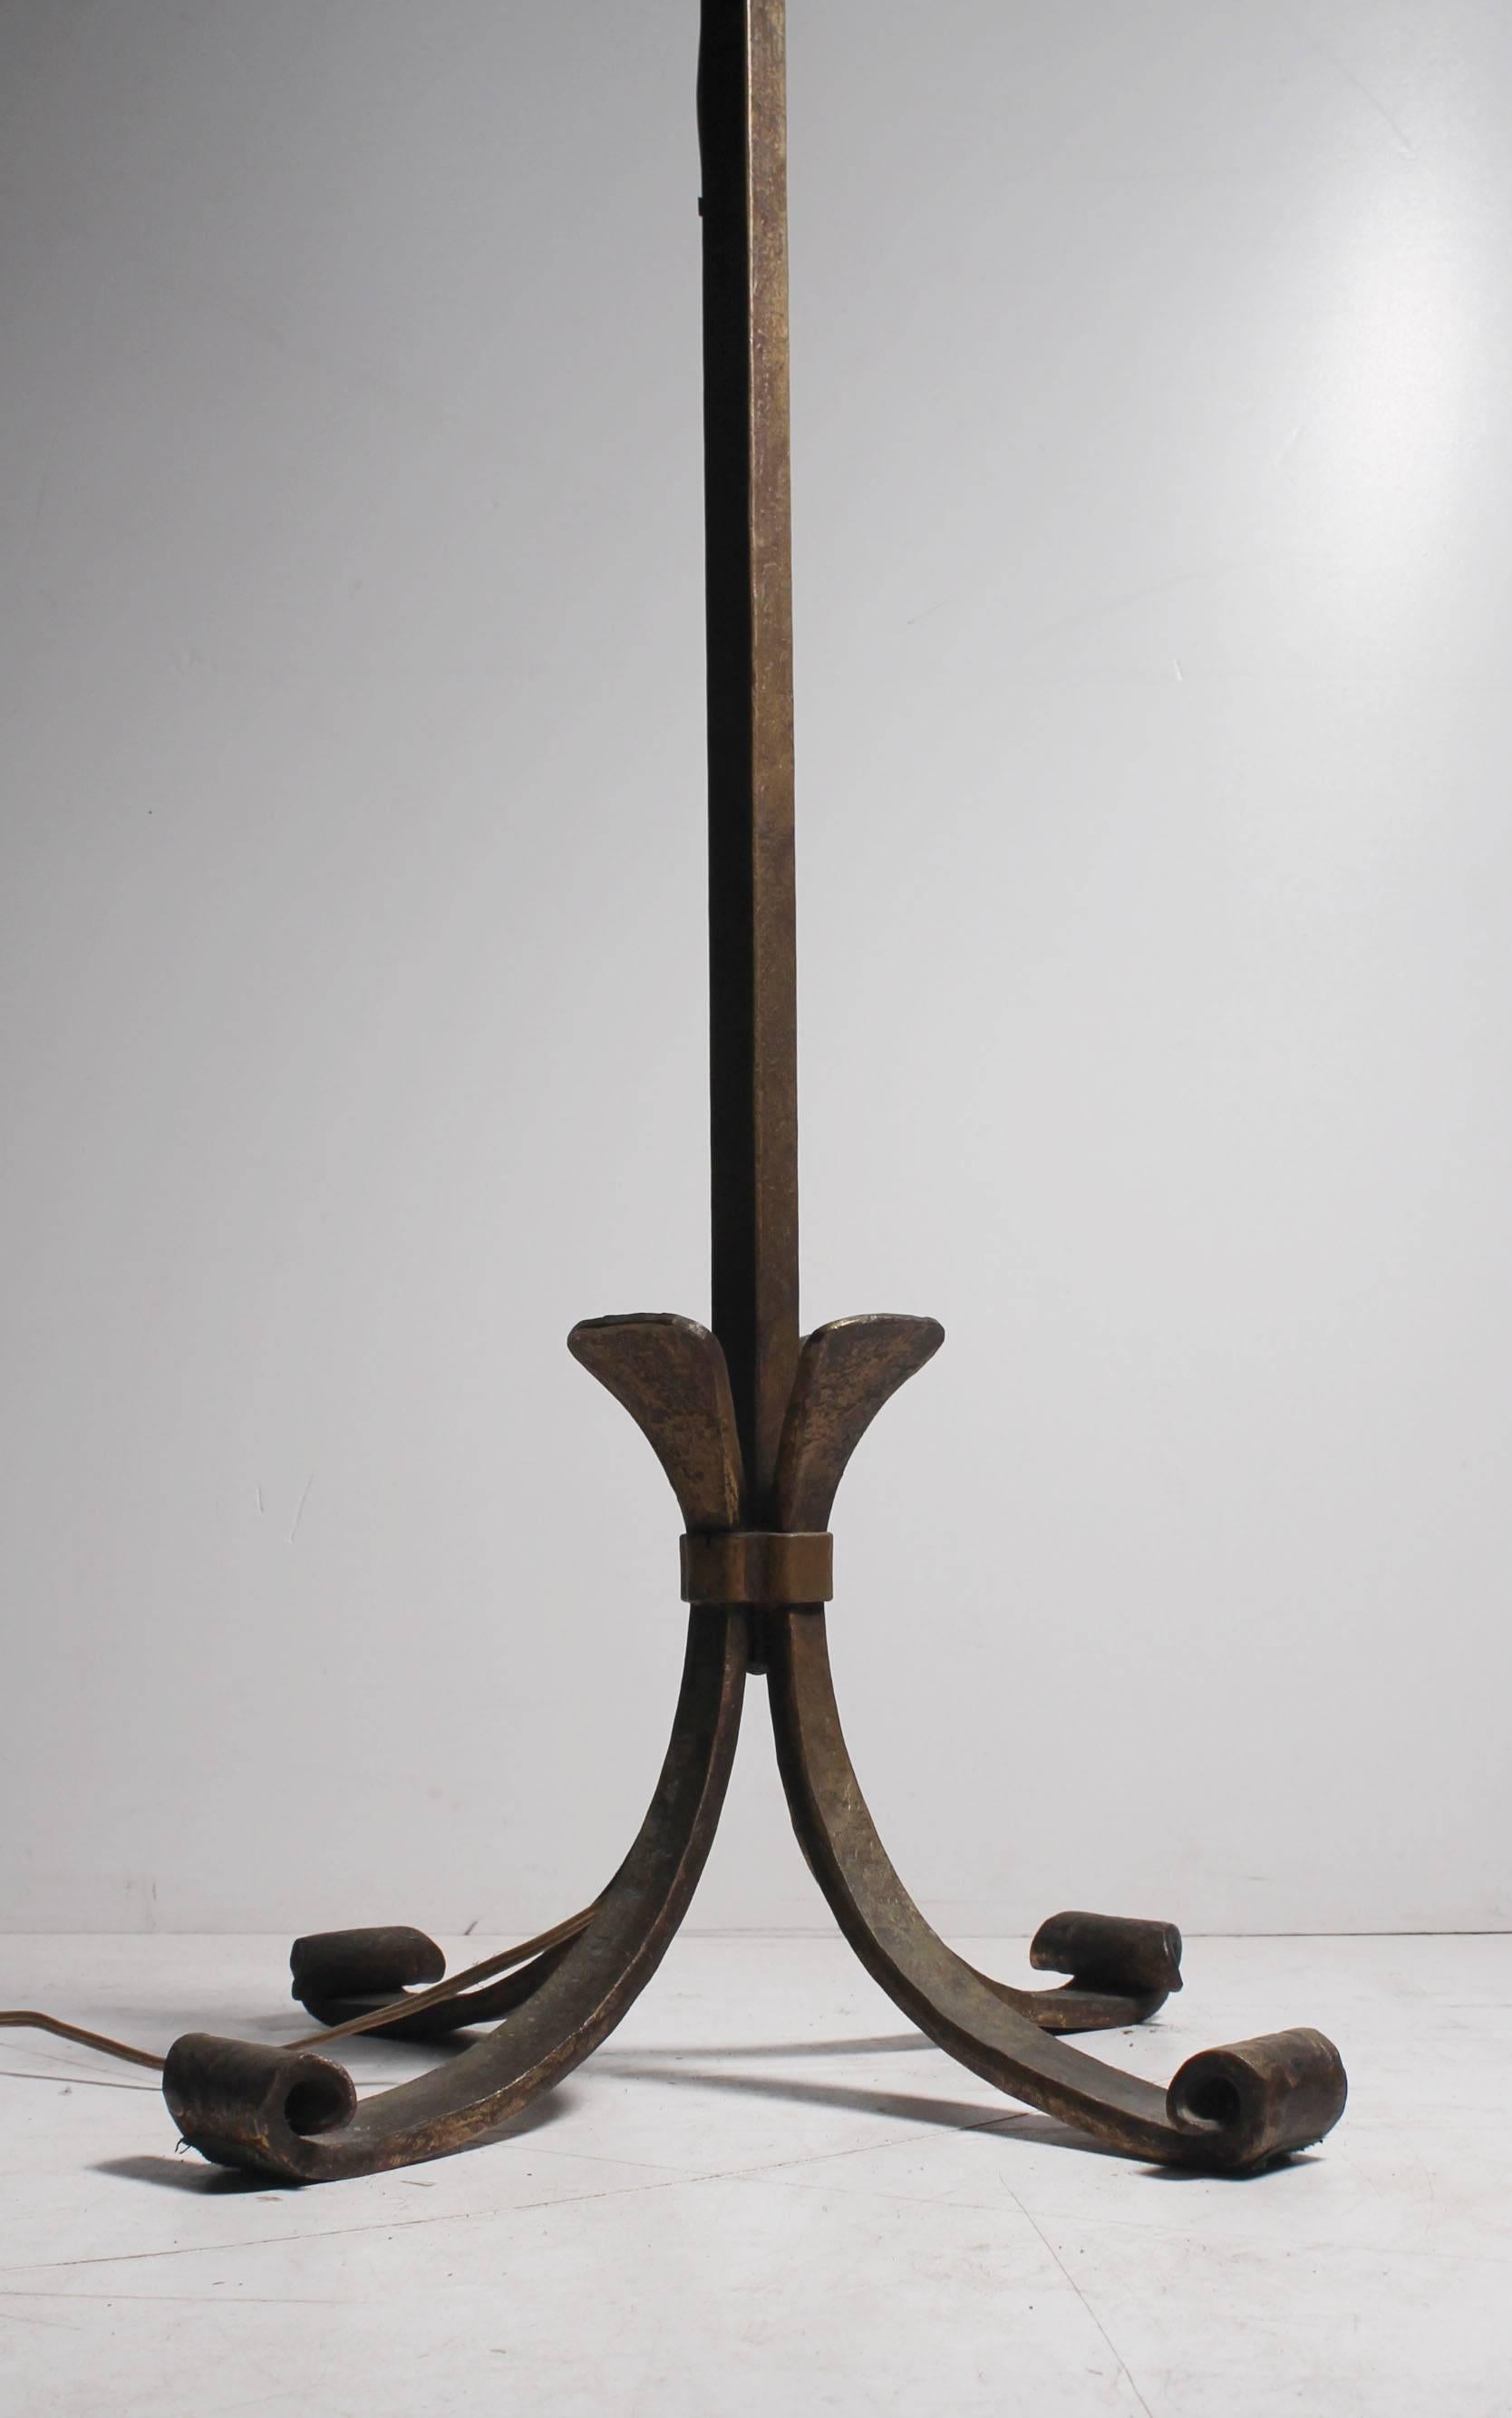 Erwin Gruen Hand-Forged Wrought Iron Gilded Torchere Floor Lamp In Good Condition For Sale In Chicago, IL